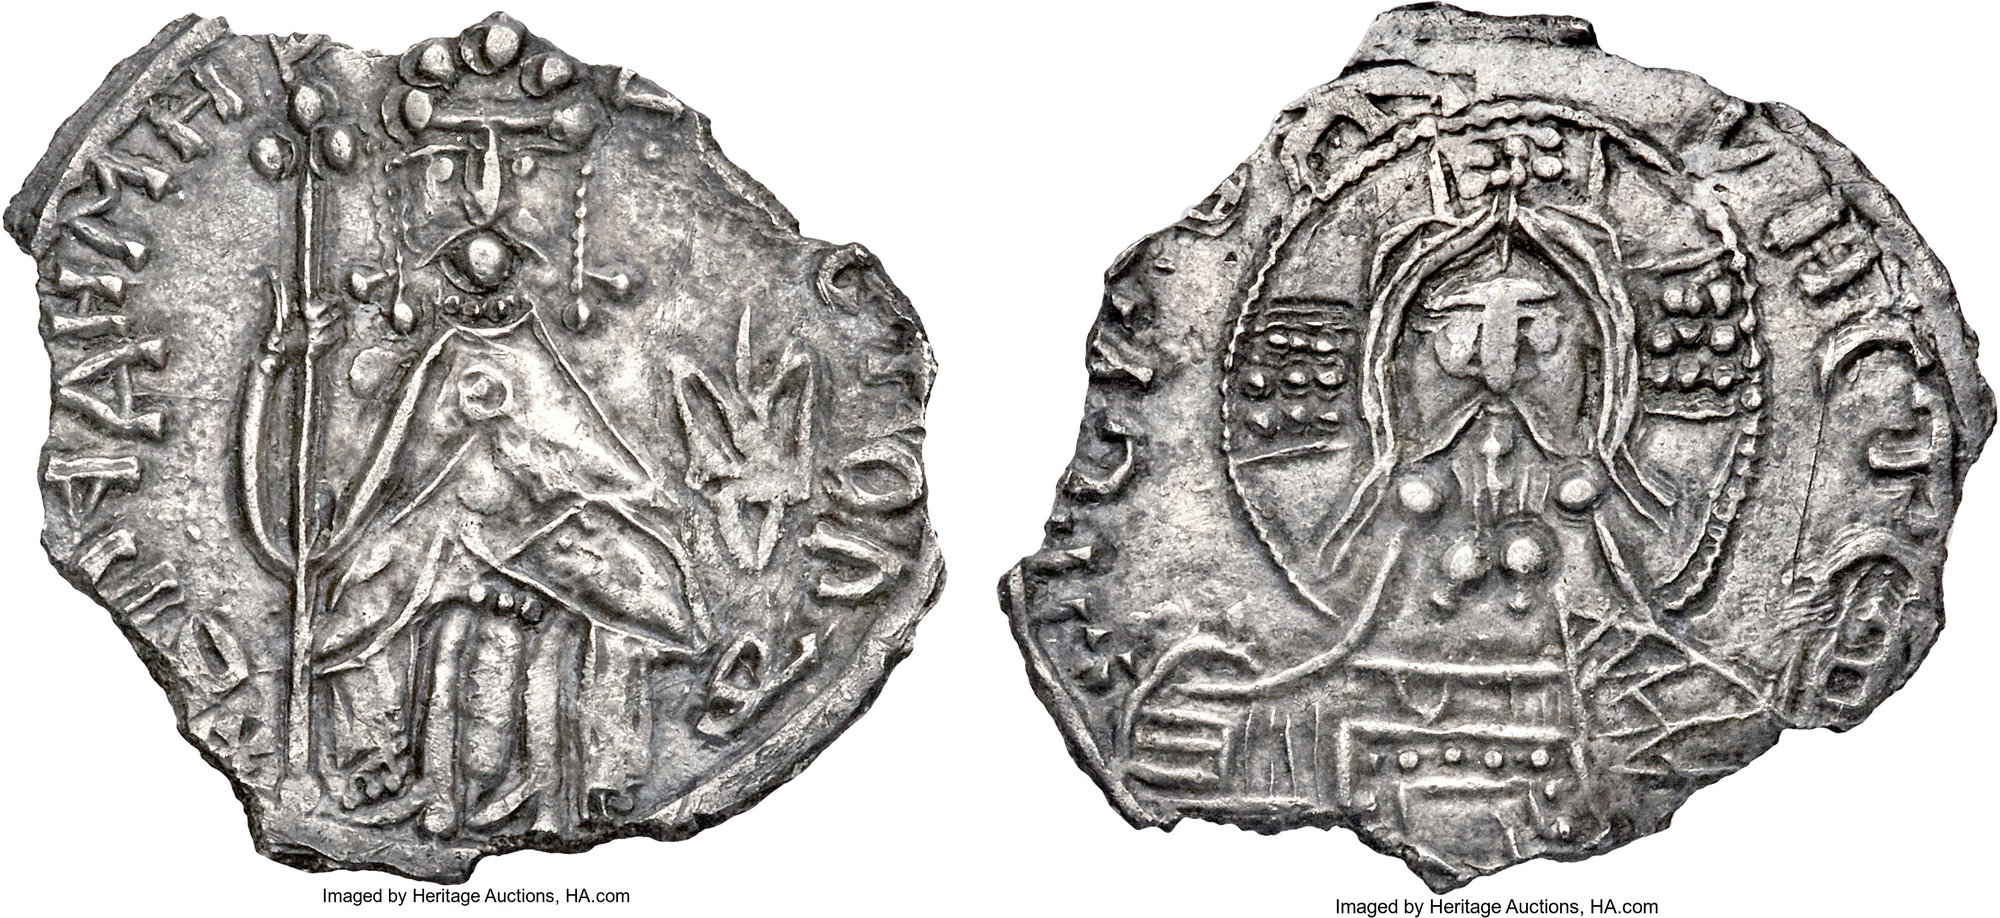 Coin of Valdimir the Great. Source: Heritage Auction/ha.com